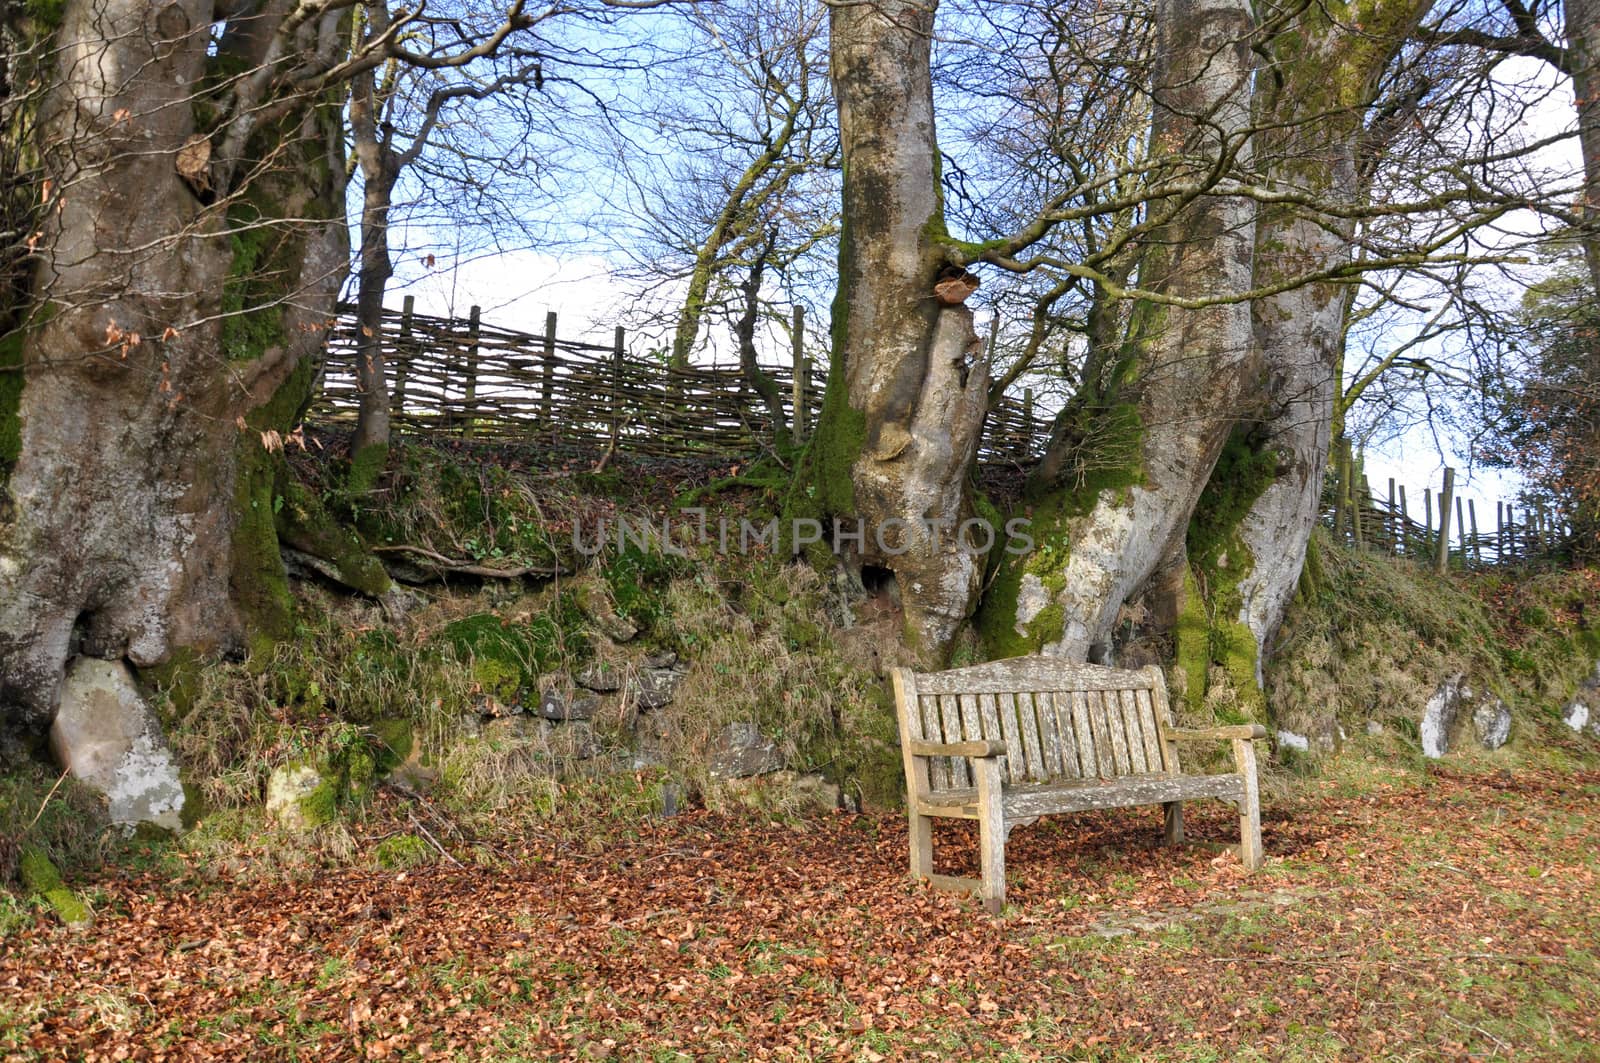 This weathered wooden bench is on the verge next to the village of Belstone, Dartmoor, Devon, England